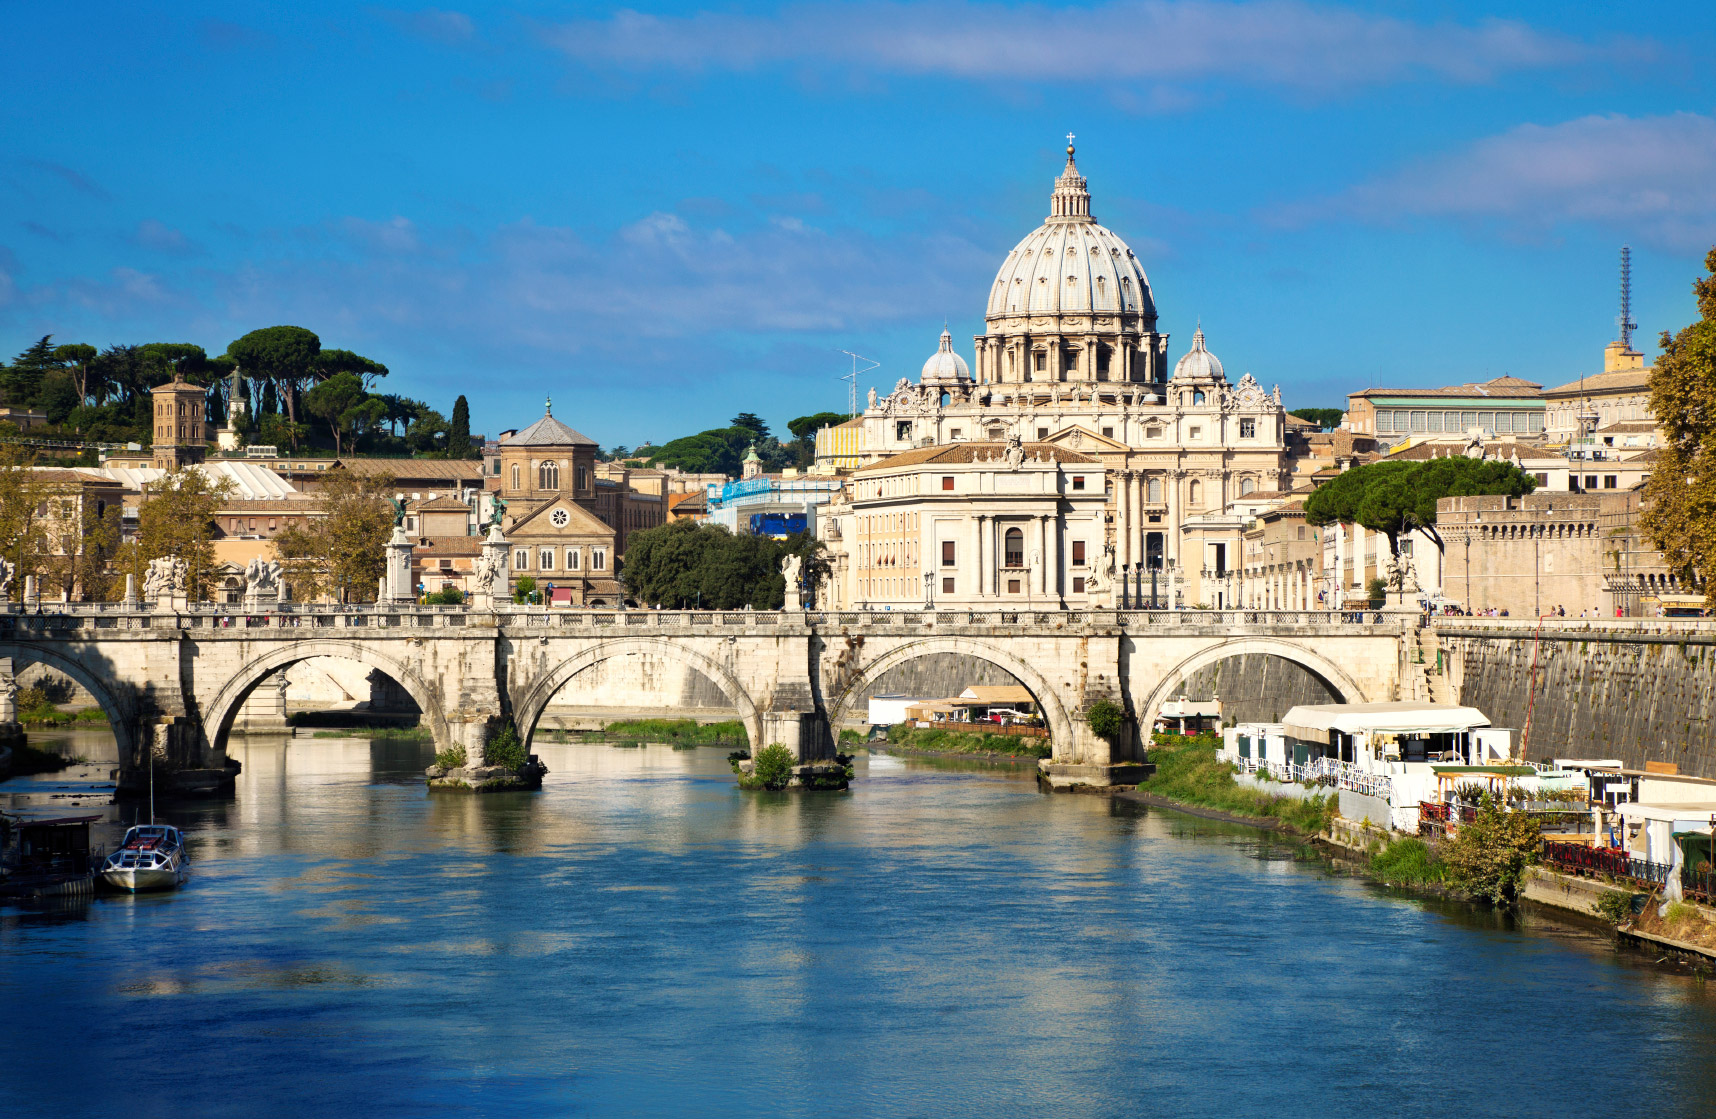 5 Things You Must Do in Rome